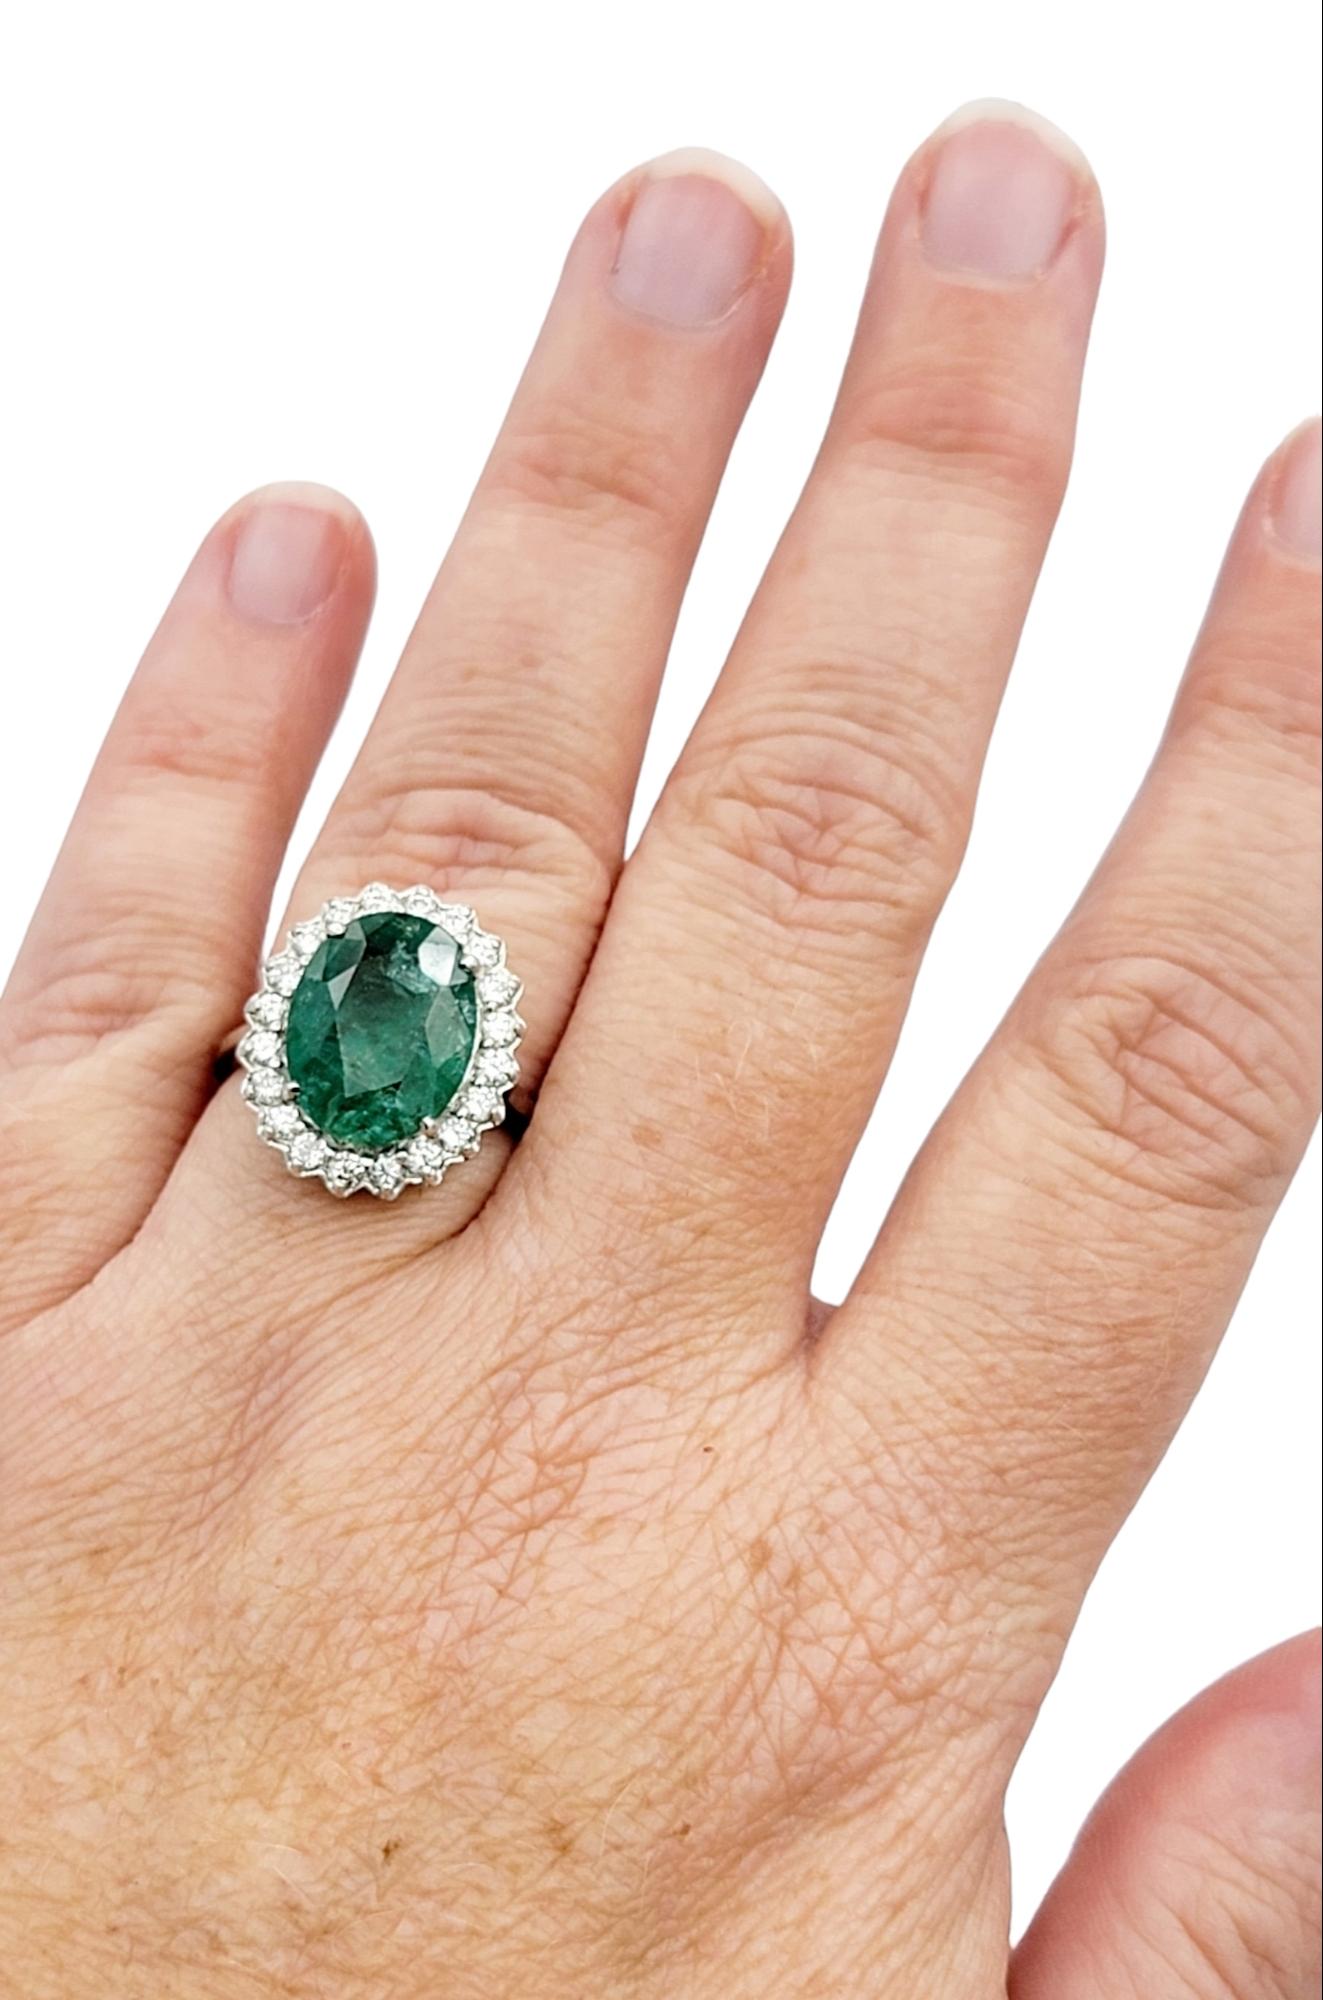 4.98 Carat Oval Cut Emerald and Diamond Halo Ring Set in 18 Karat White Gold For Sale 3